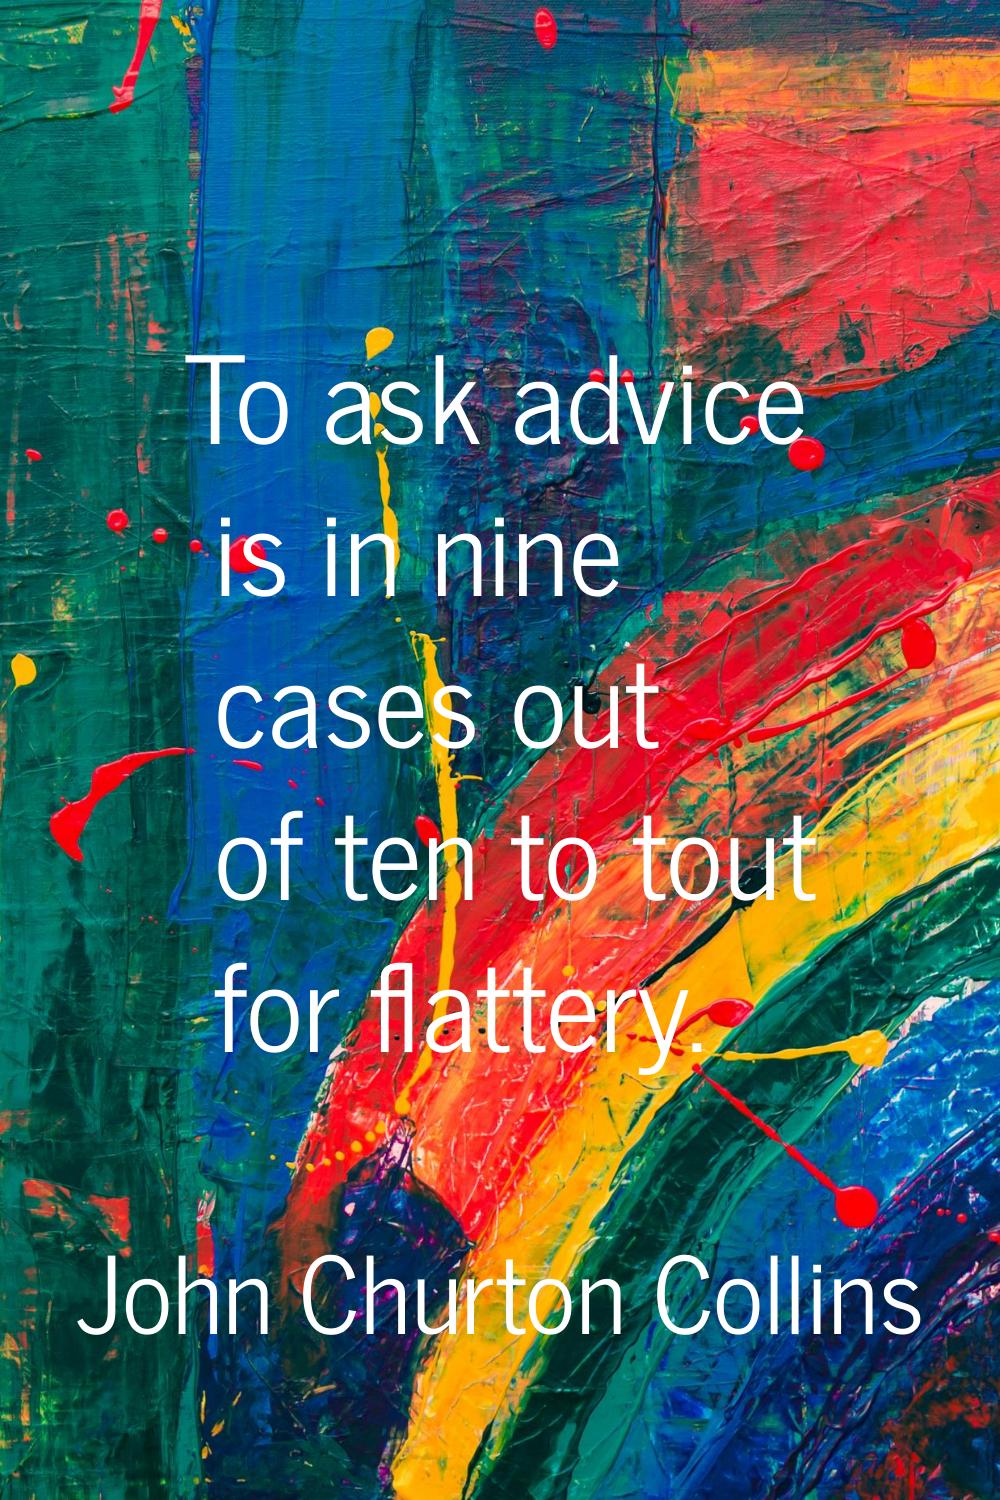 To ask advice is in nine cases out of ten to tout for flattery.